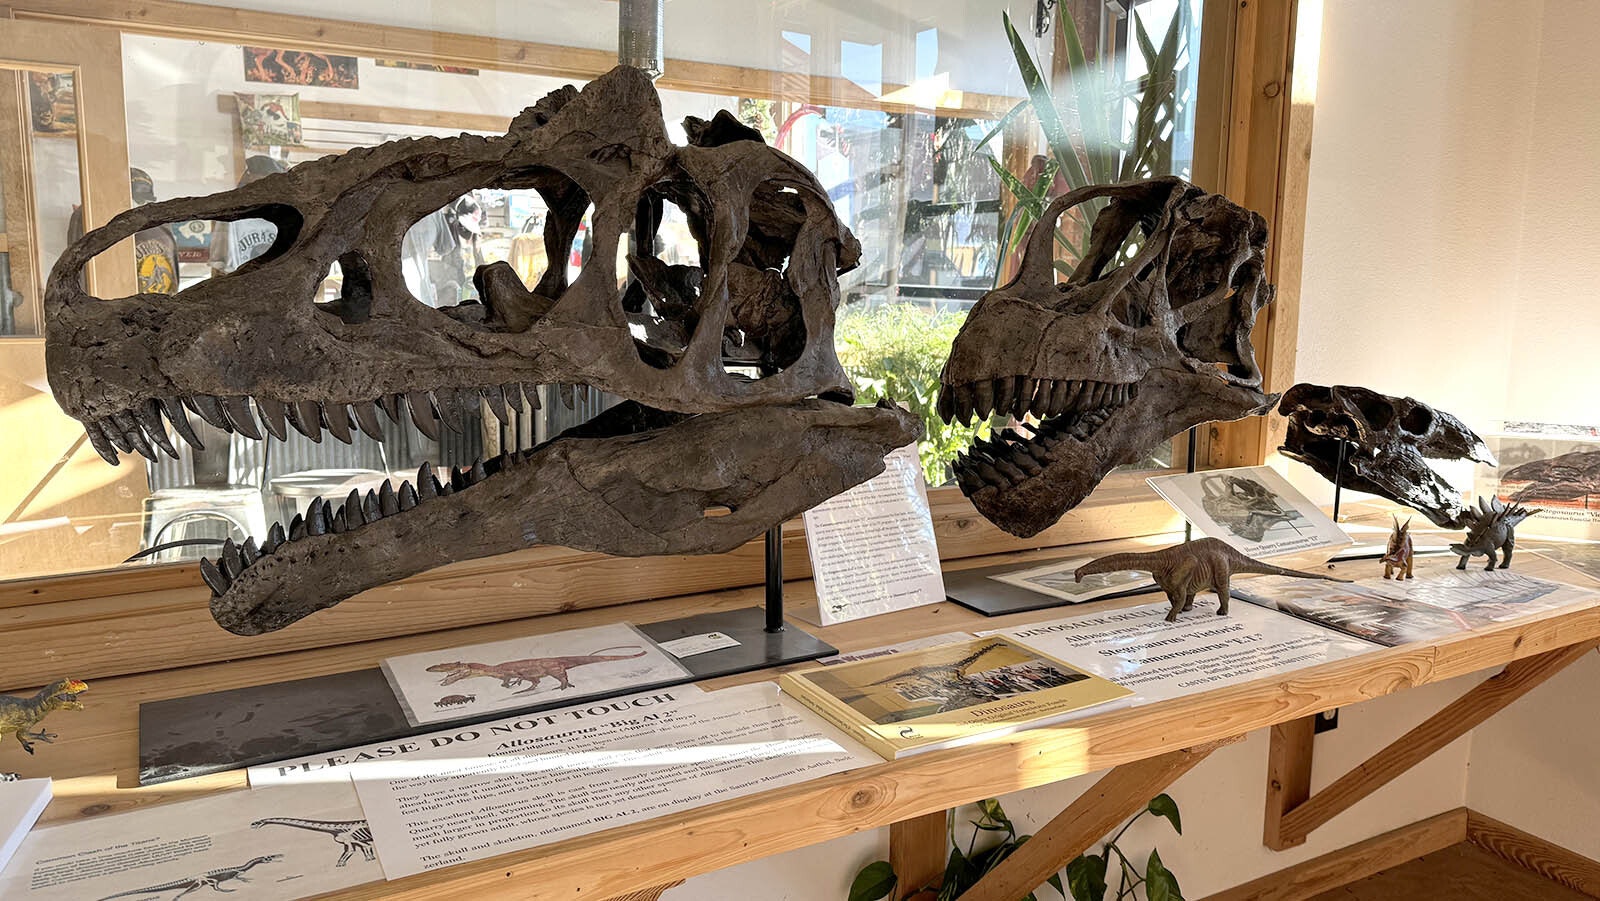 The skulls of "Big Al II" the Allosaurus, a Camarasaurus, and a Stegosaurus in the Big Horn Basin Dinosaur and Geoscience Museum in Greybull. These fossils are among a countless number of exceptional fossil discoveries from the Greybull area.